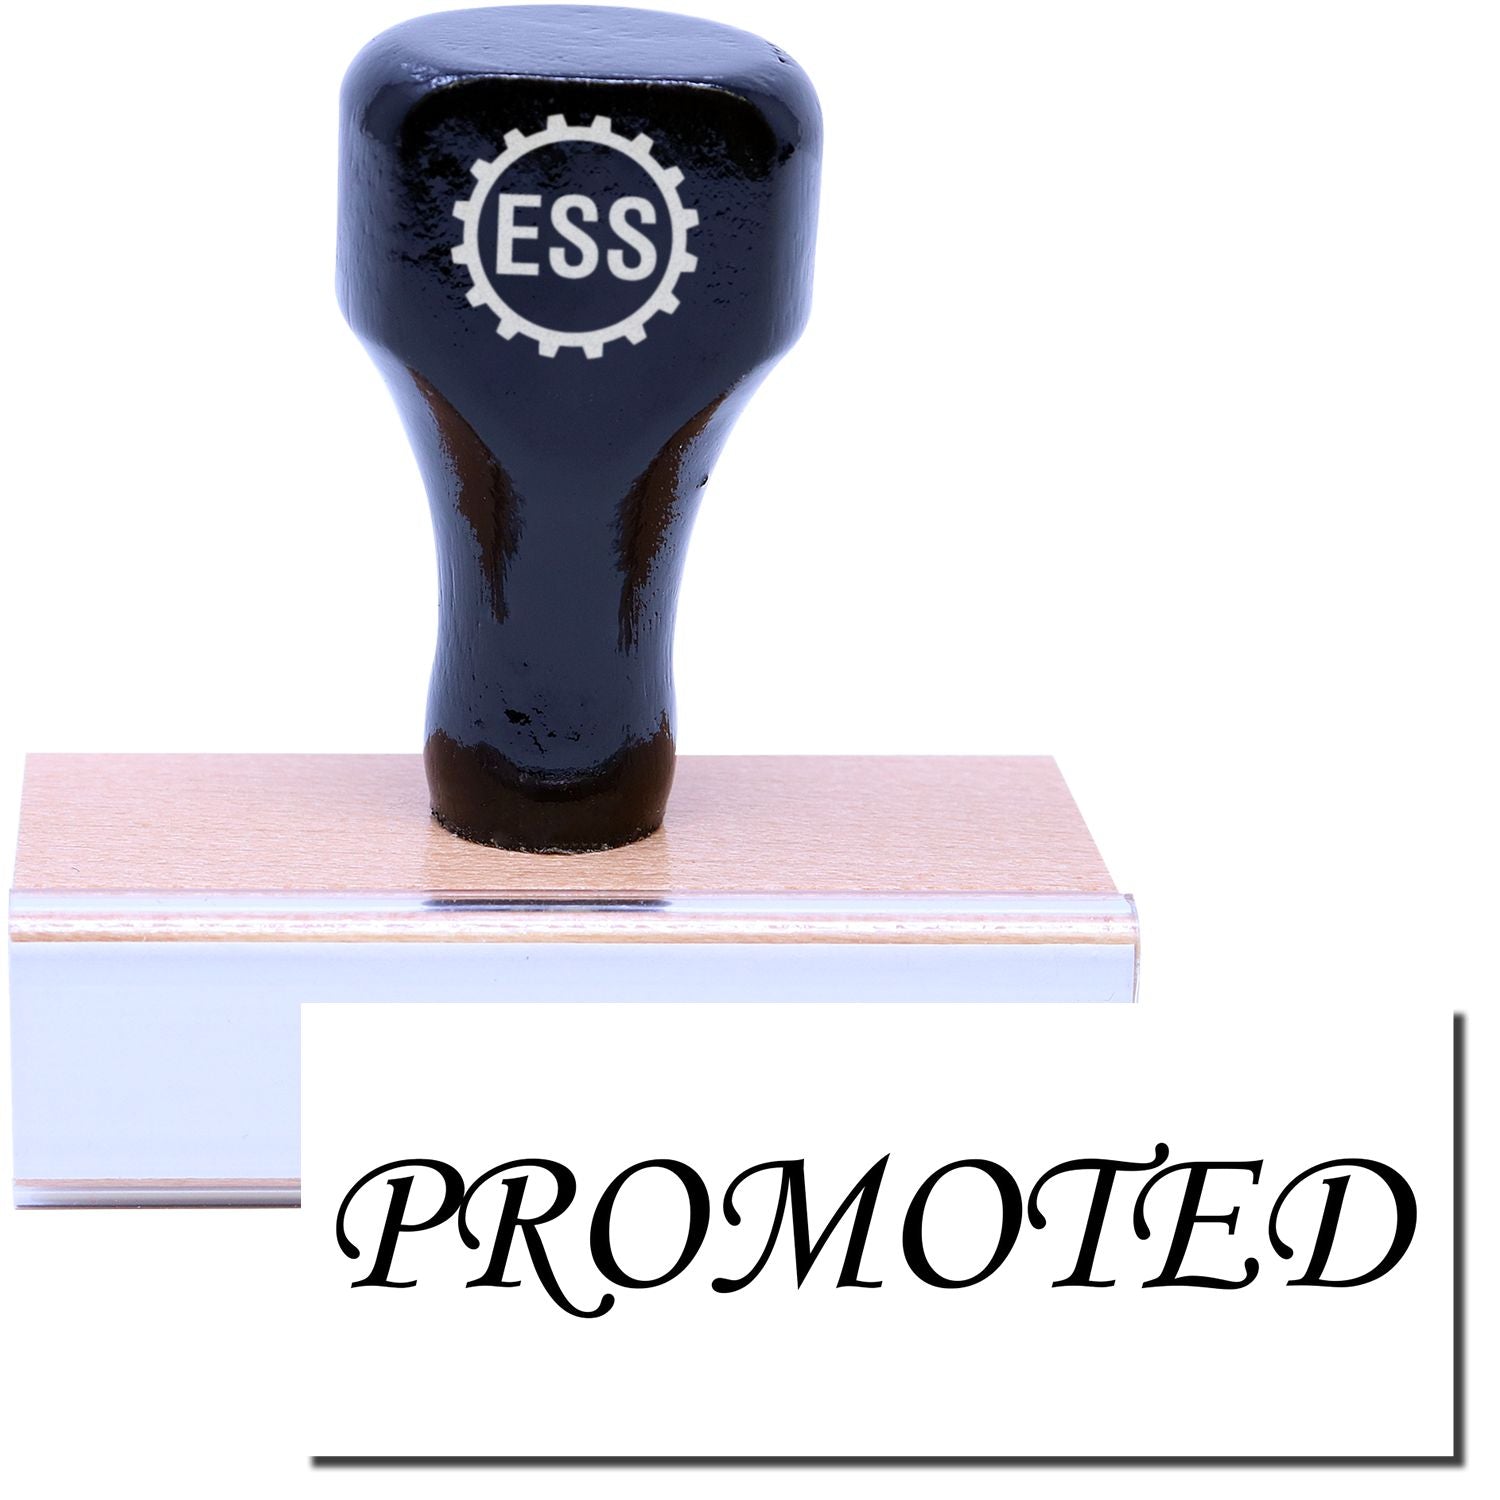 A stock office rubber stamp with a stamped image showing how the text "PROMOTED" in a large font is displayed after stamping.